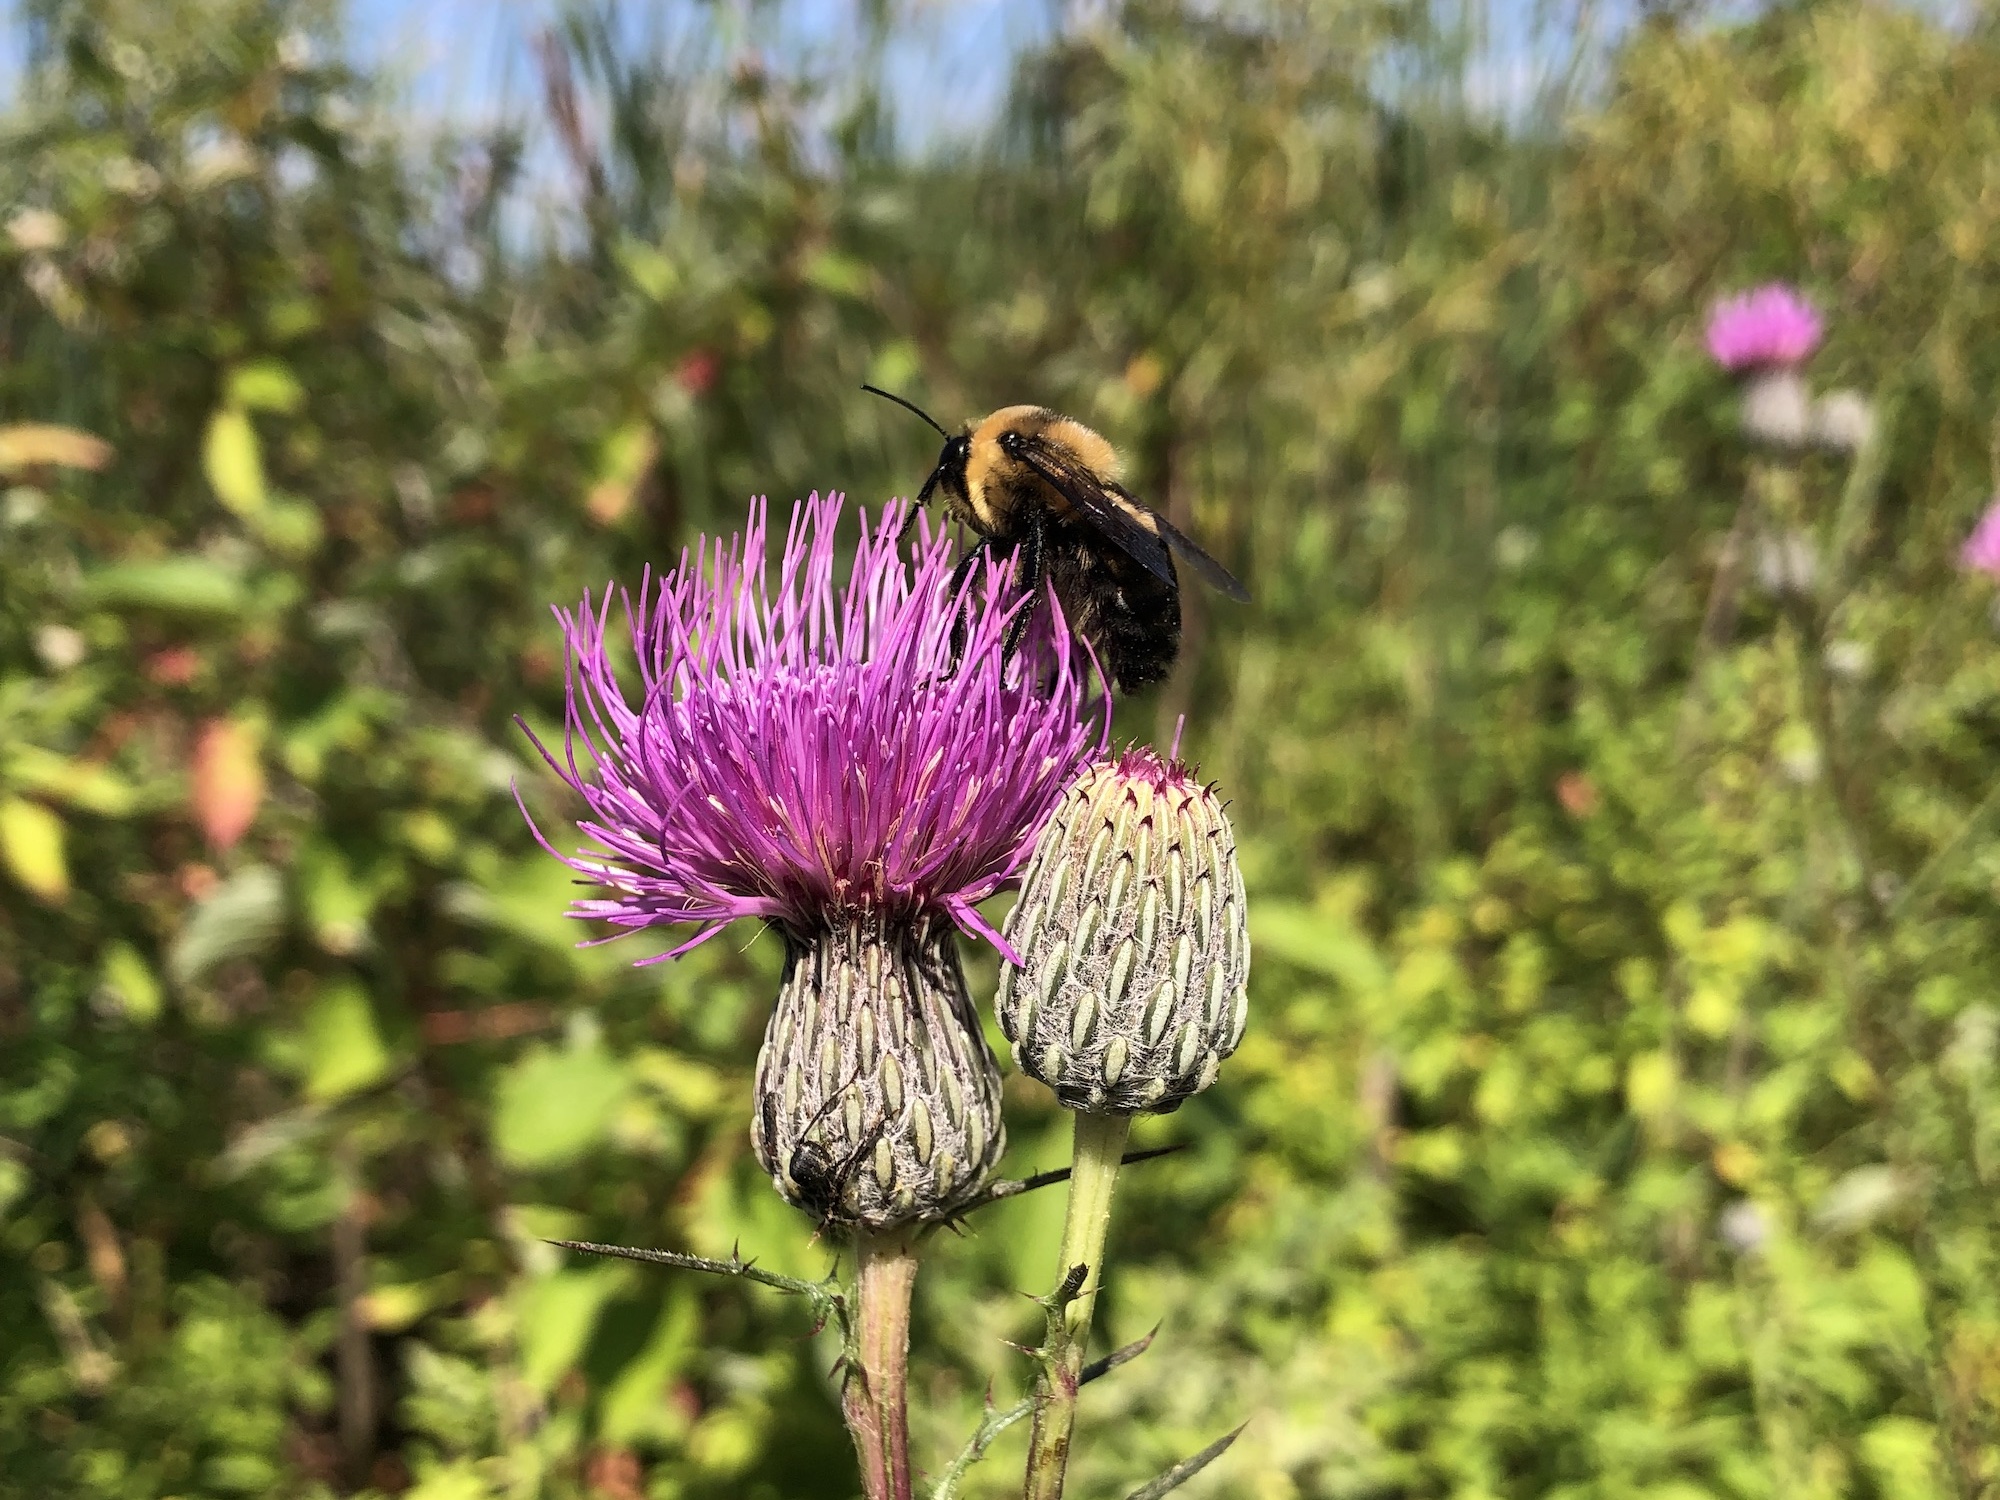 Bee on Swamp Thistle near cattails along shore of Lake Wingra along Arboretum Drive in Madison, Wisconsin on August 22, 2022.